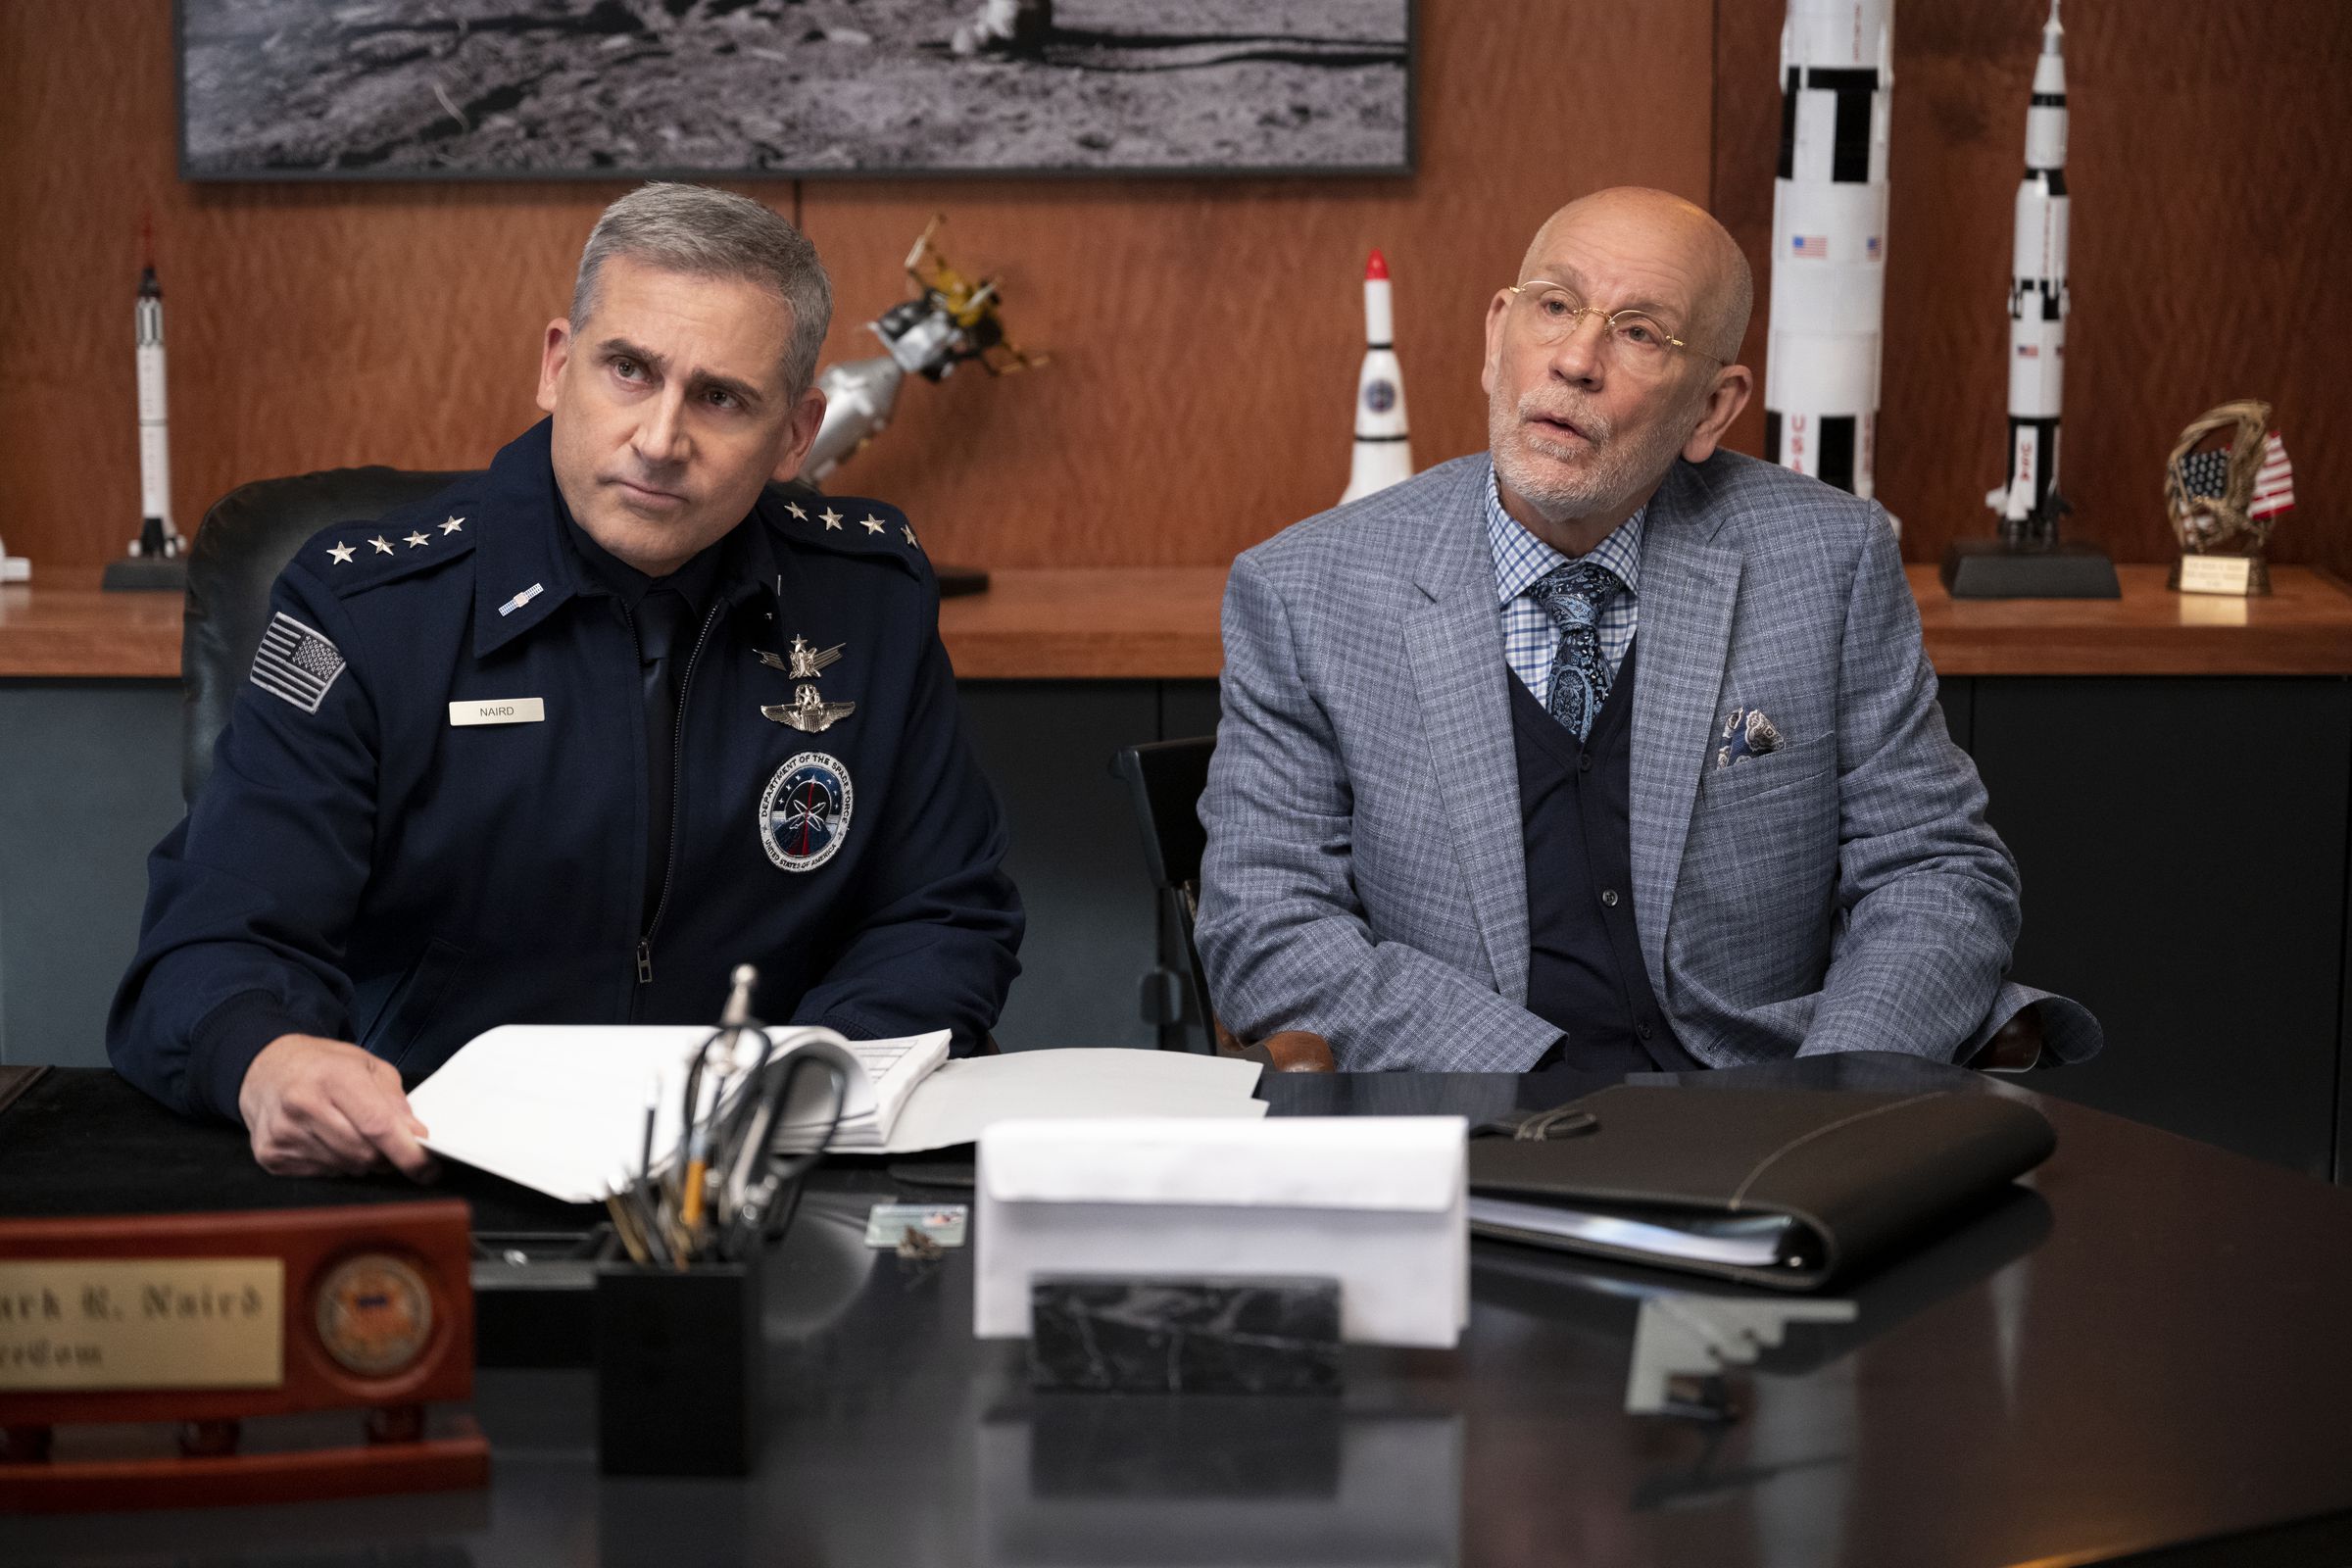 Steve Carell as General Mark Naird, John Malkovich as Dr. Adrian Mallory in Space Force.